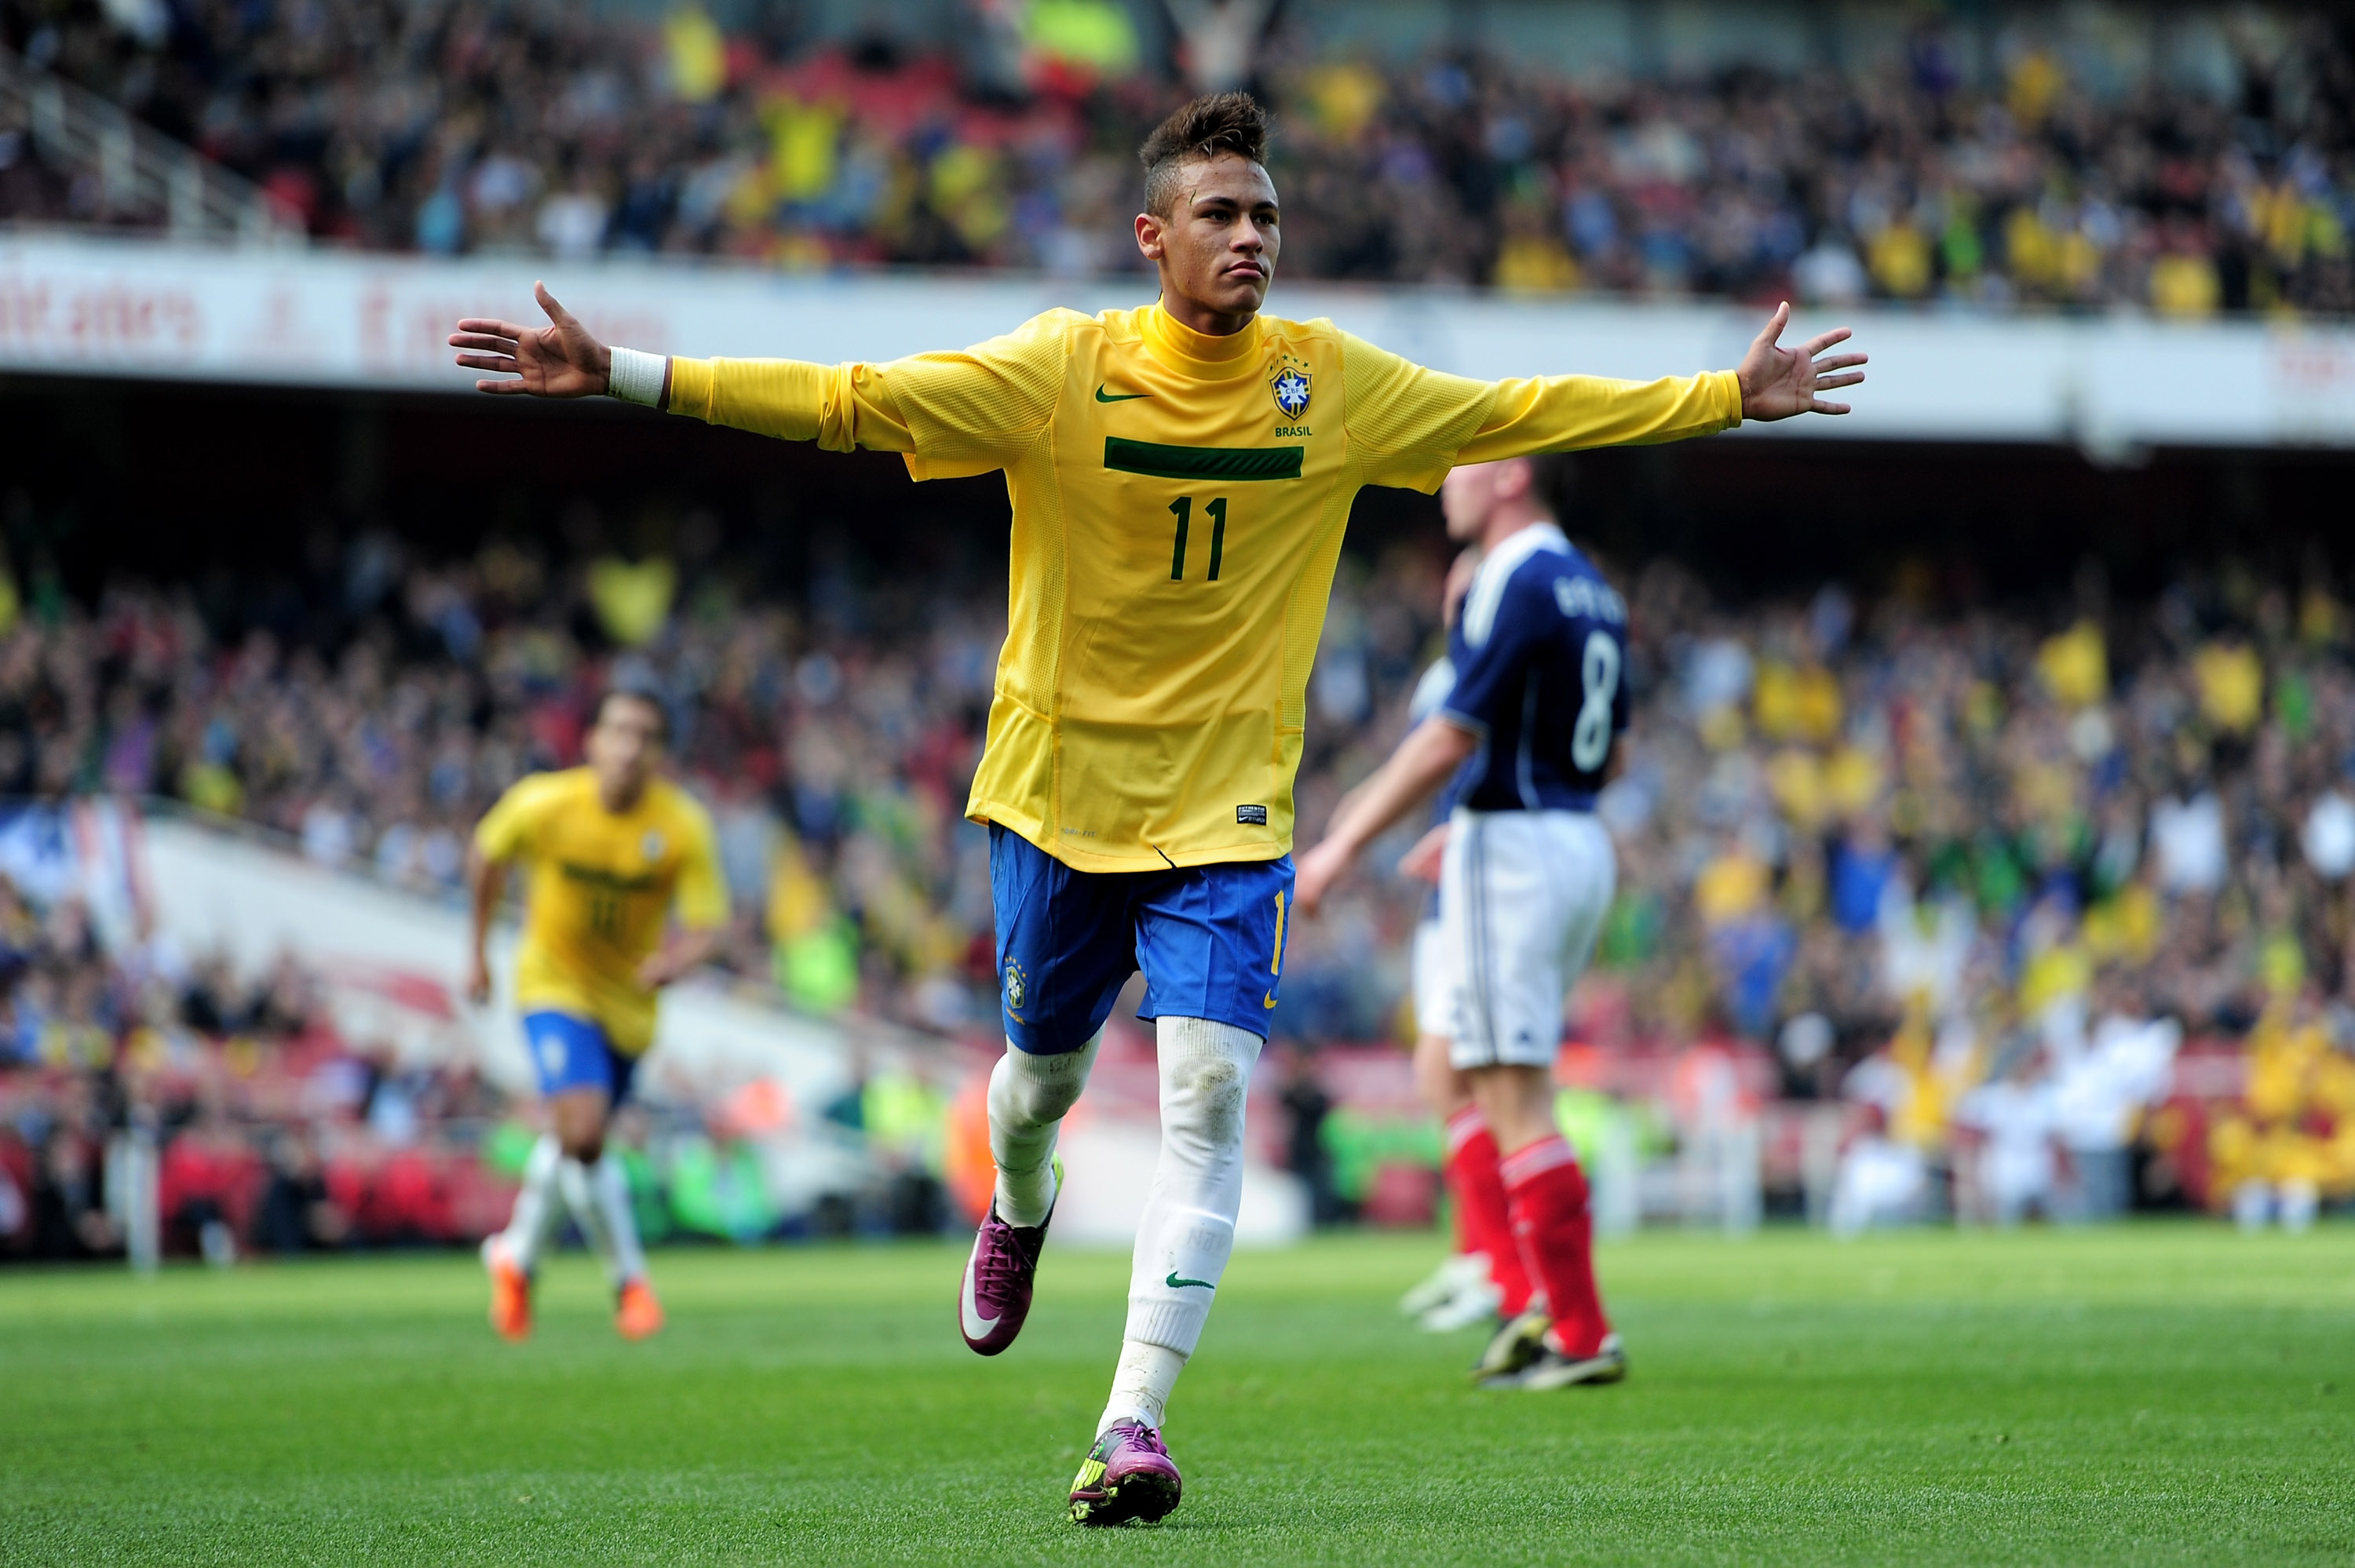 LONDON, ENGLAND - MARCH 27:  Neymar of Brazil celebrates scoring the opening goal during the International friendly match between Brazil and Scotland at Emirates Stadium on March 27, 2011 in London, England.  (Photo by Jamie McDonald/Getty Images)